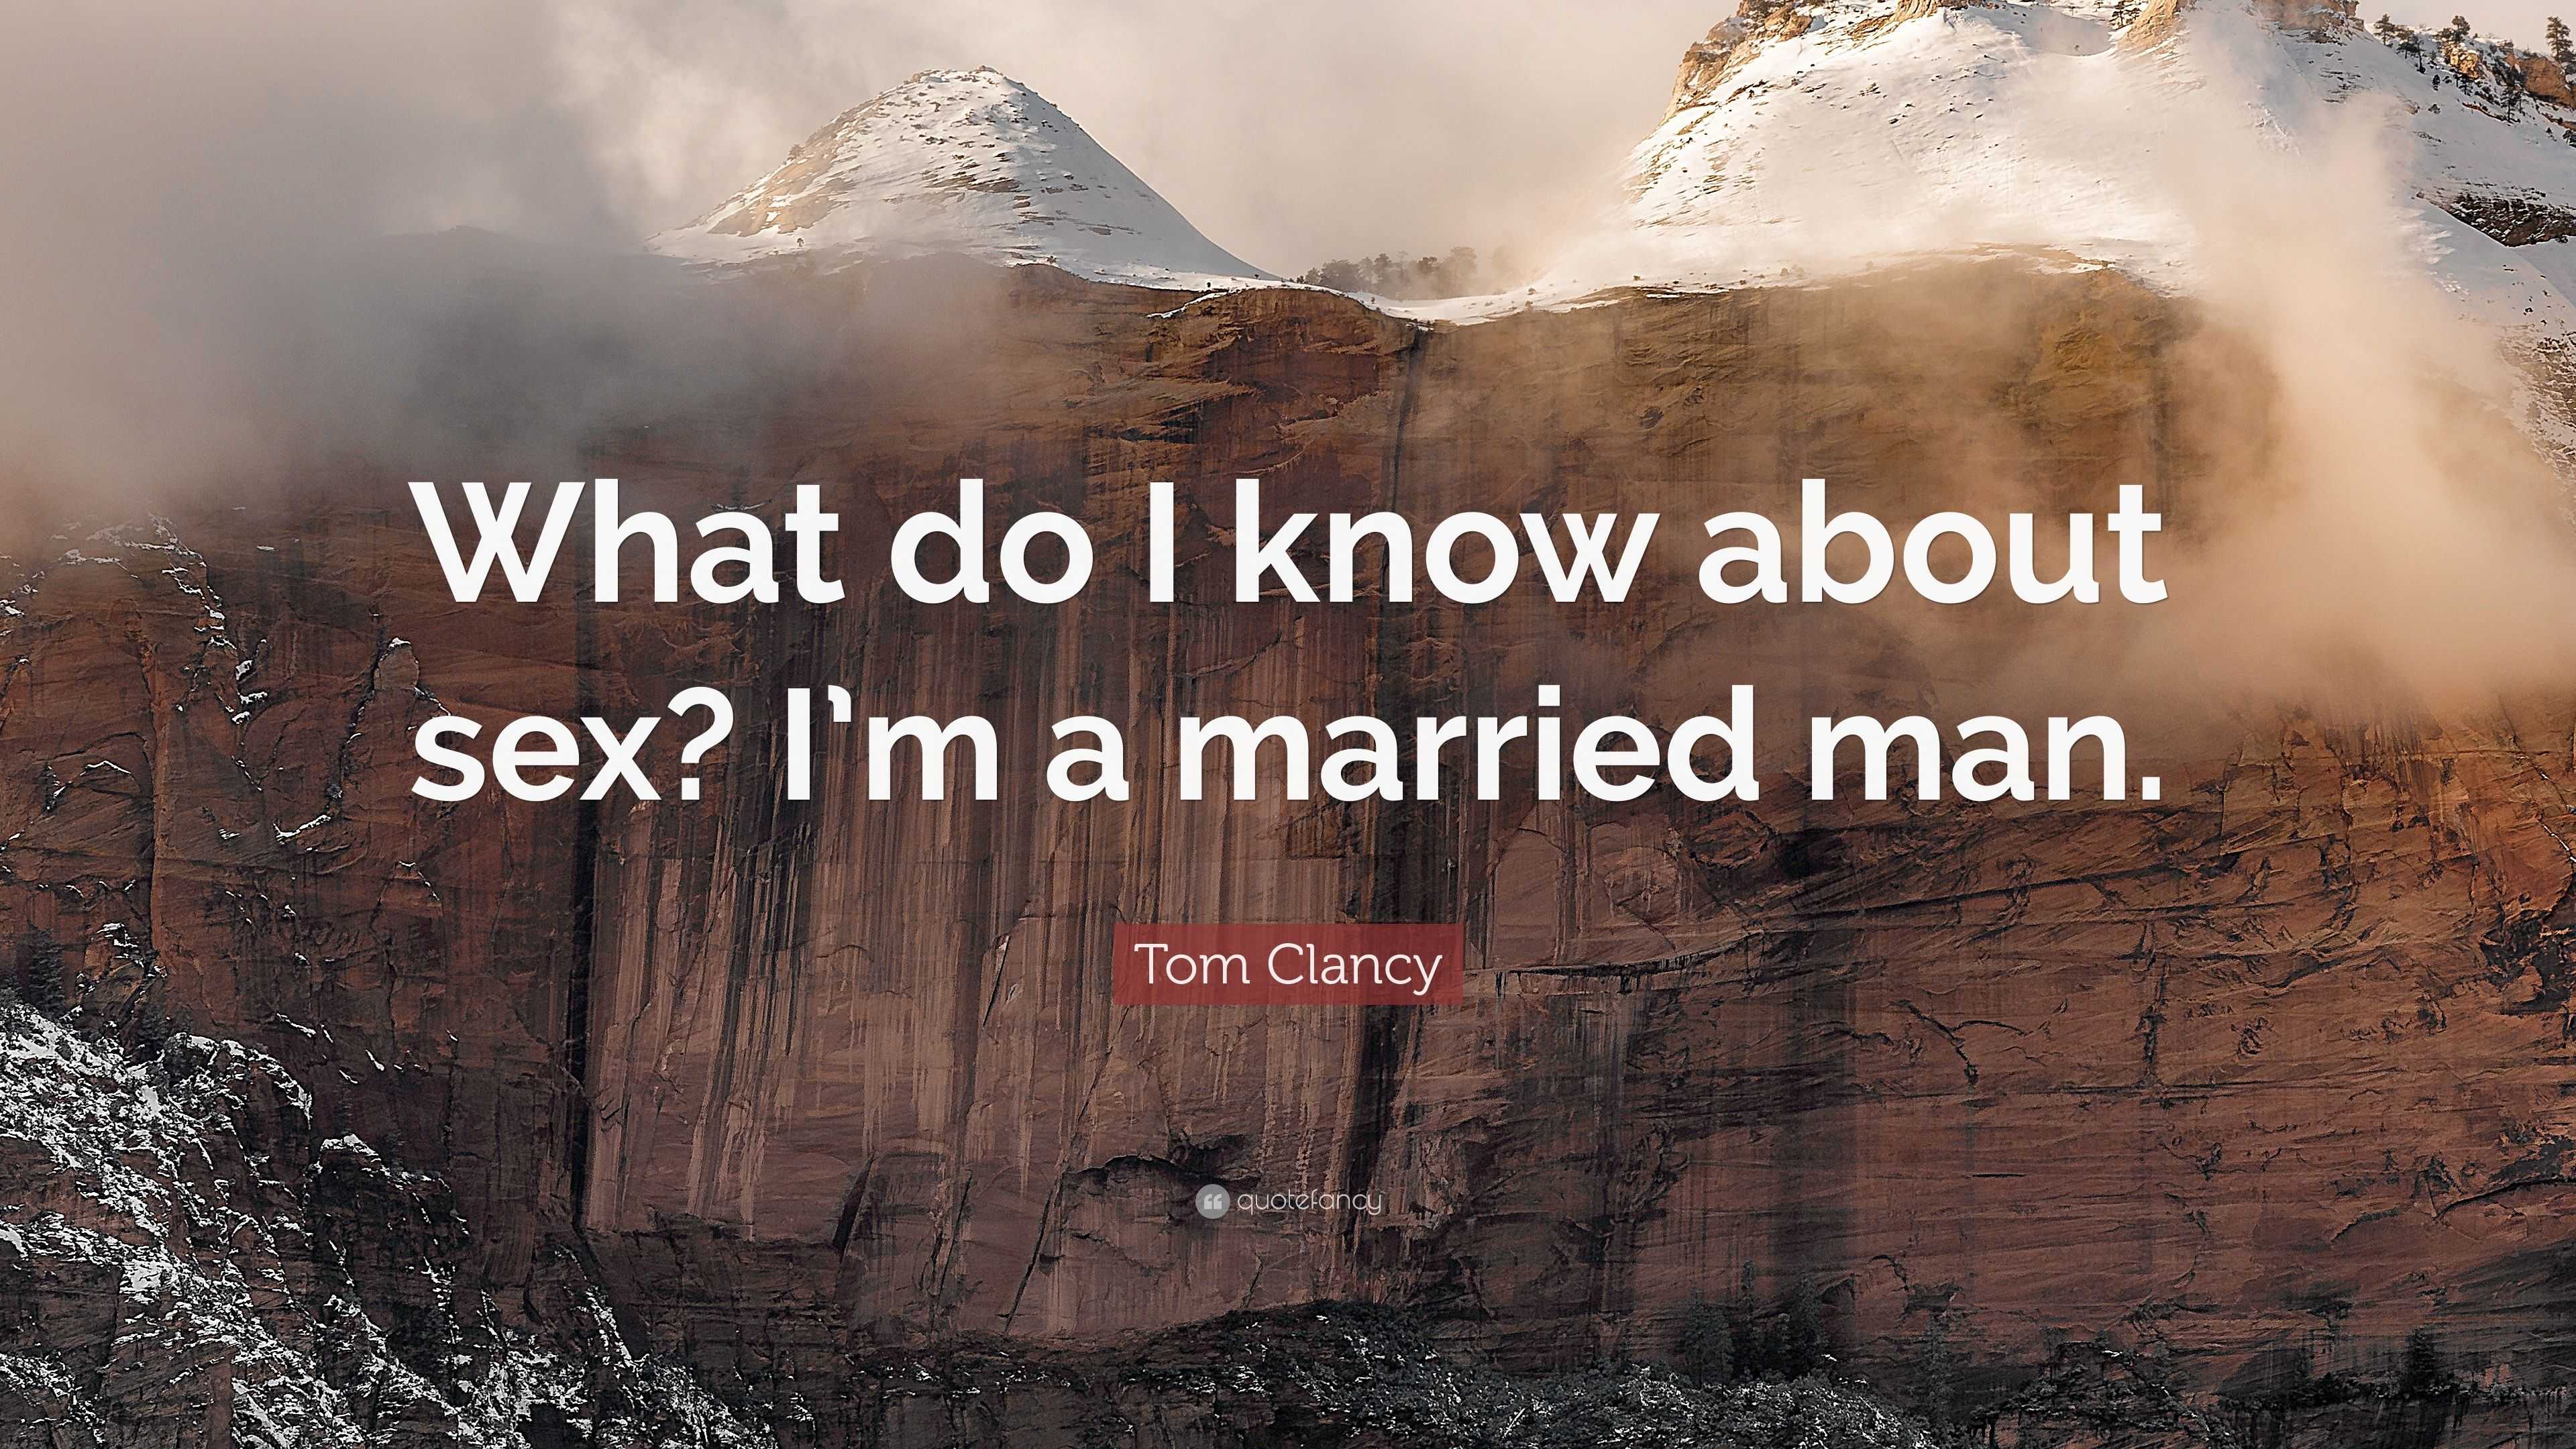 Tom Clancy Quote “What do I know about sex? Im a married man.” image